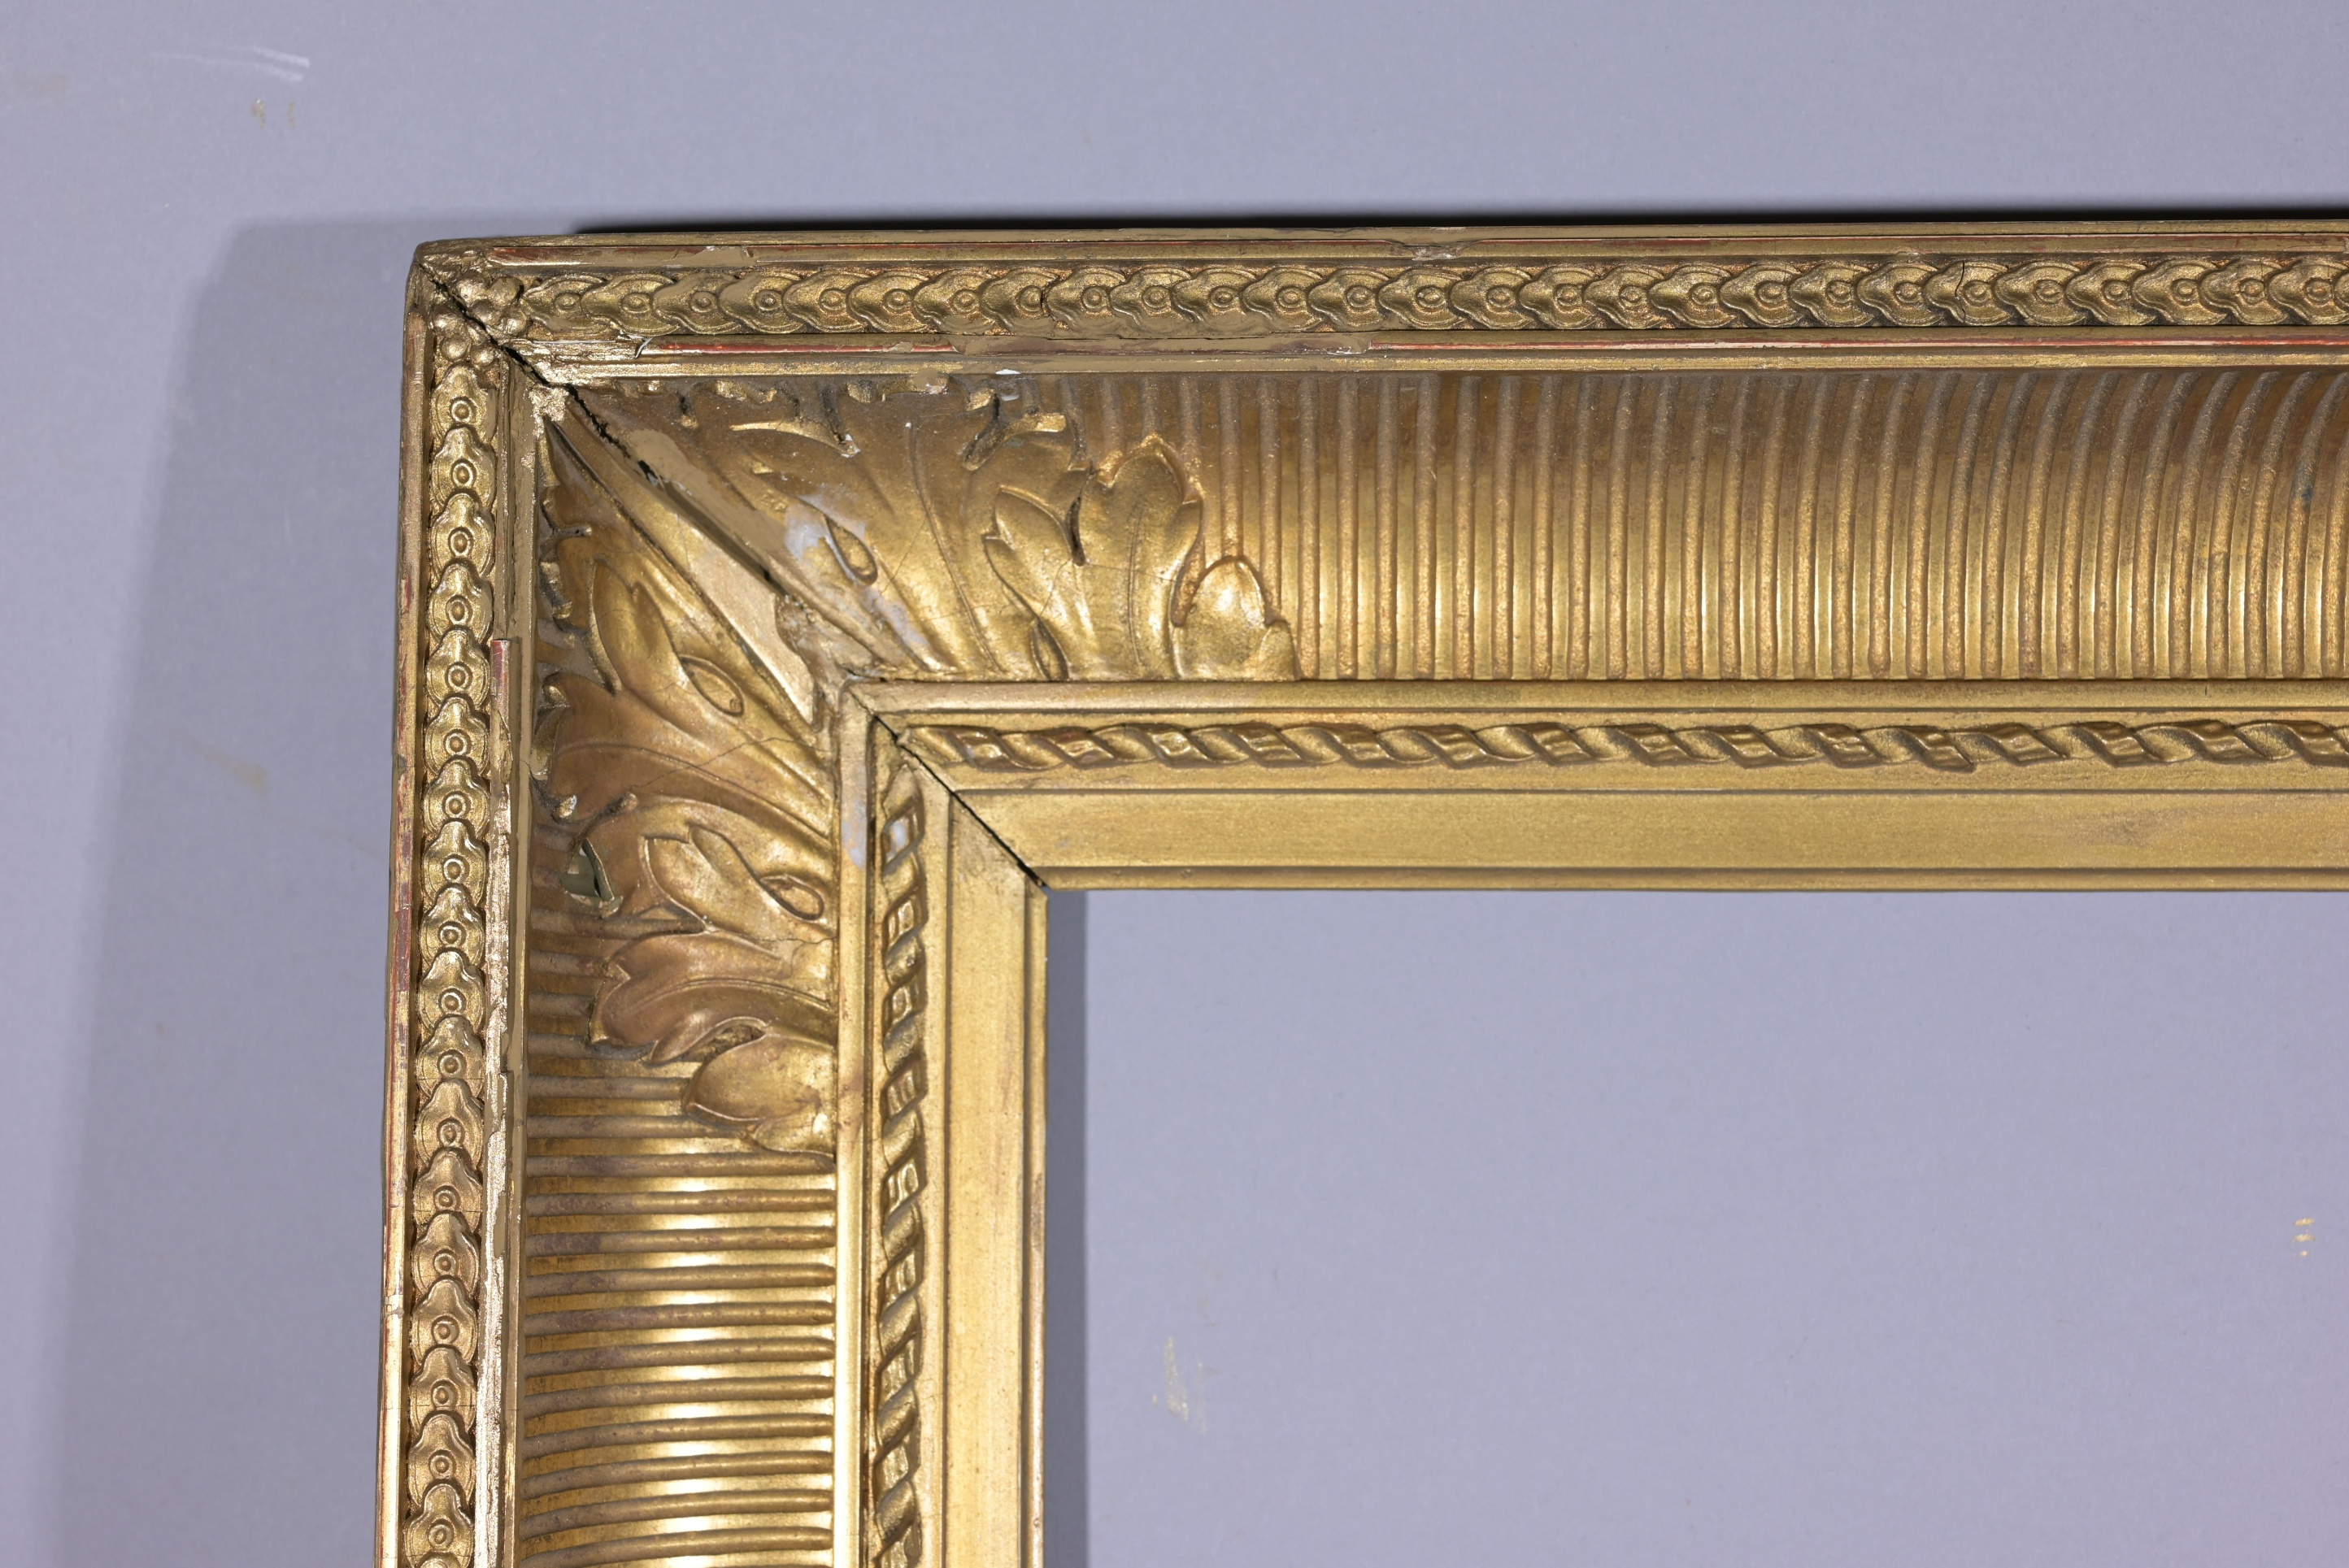 French 1860's Gilt Frame - 29.75 x 20.25 - Image 3 of 8